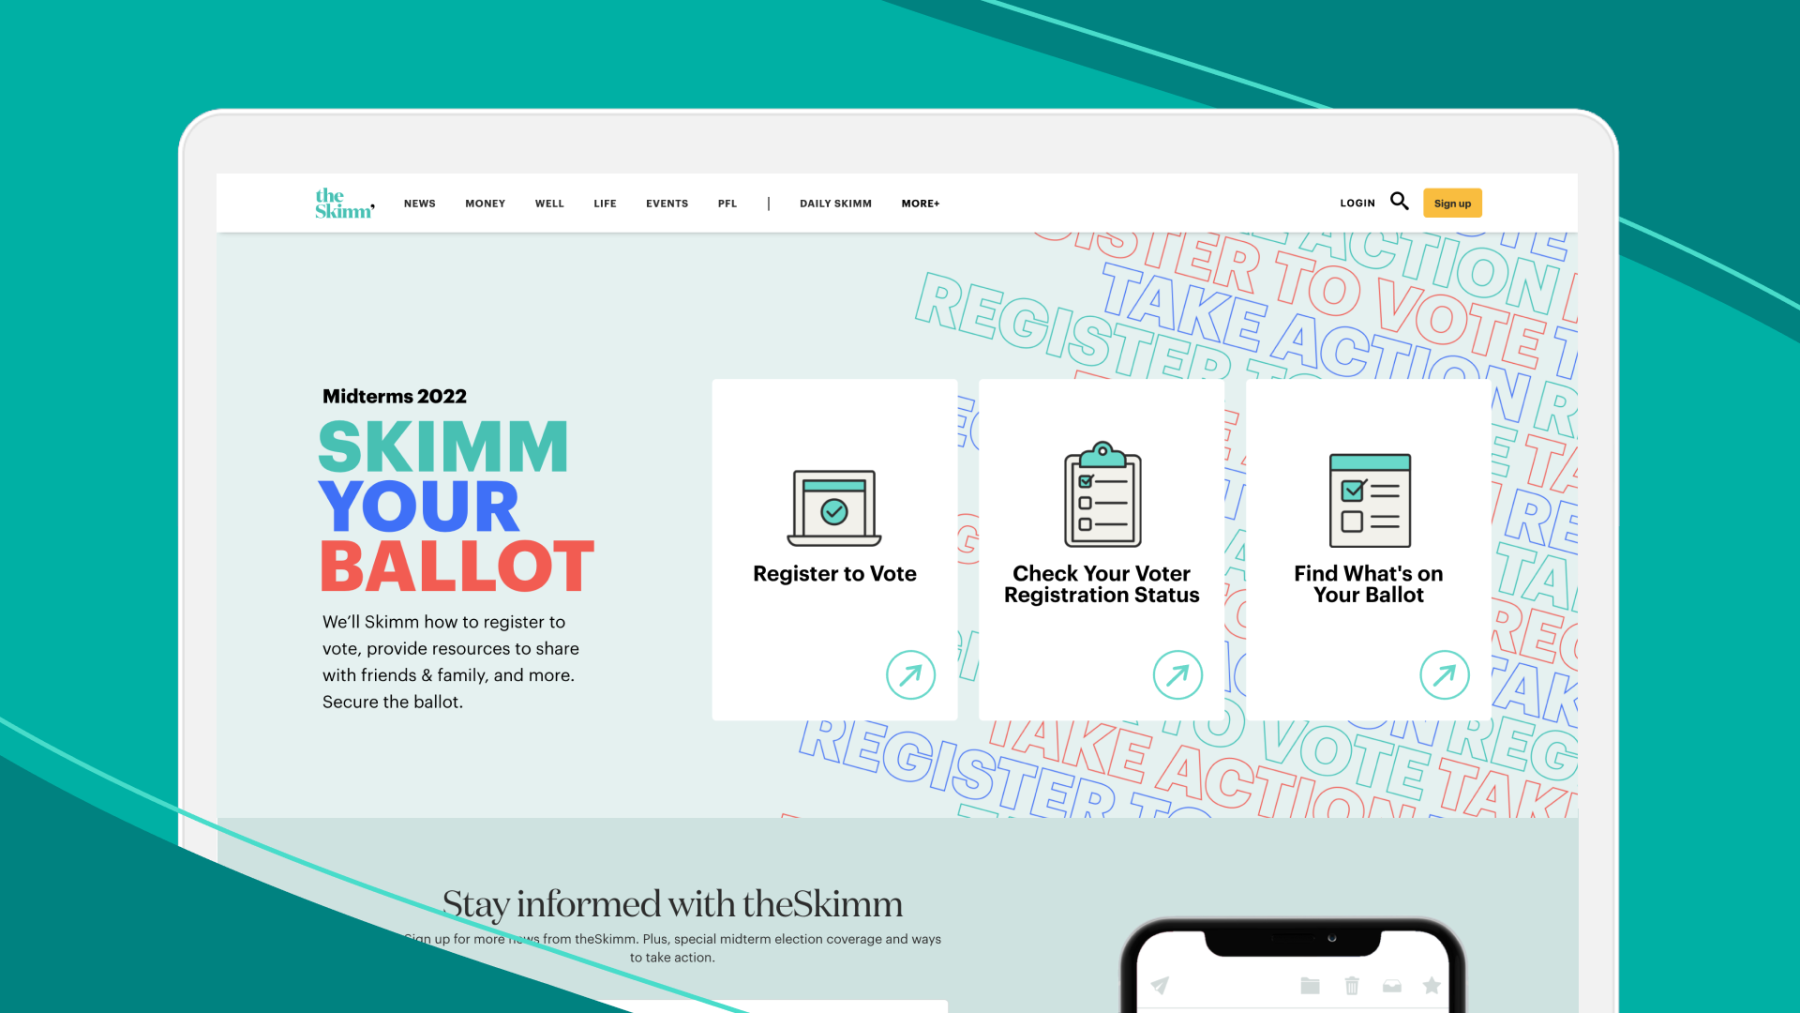 Midterms 2022 Skimm Your Ballot